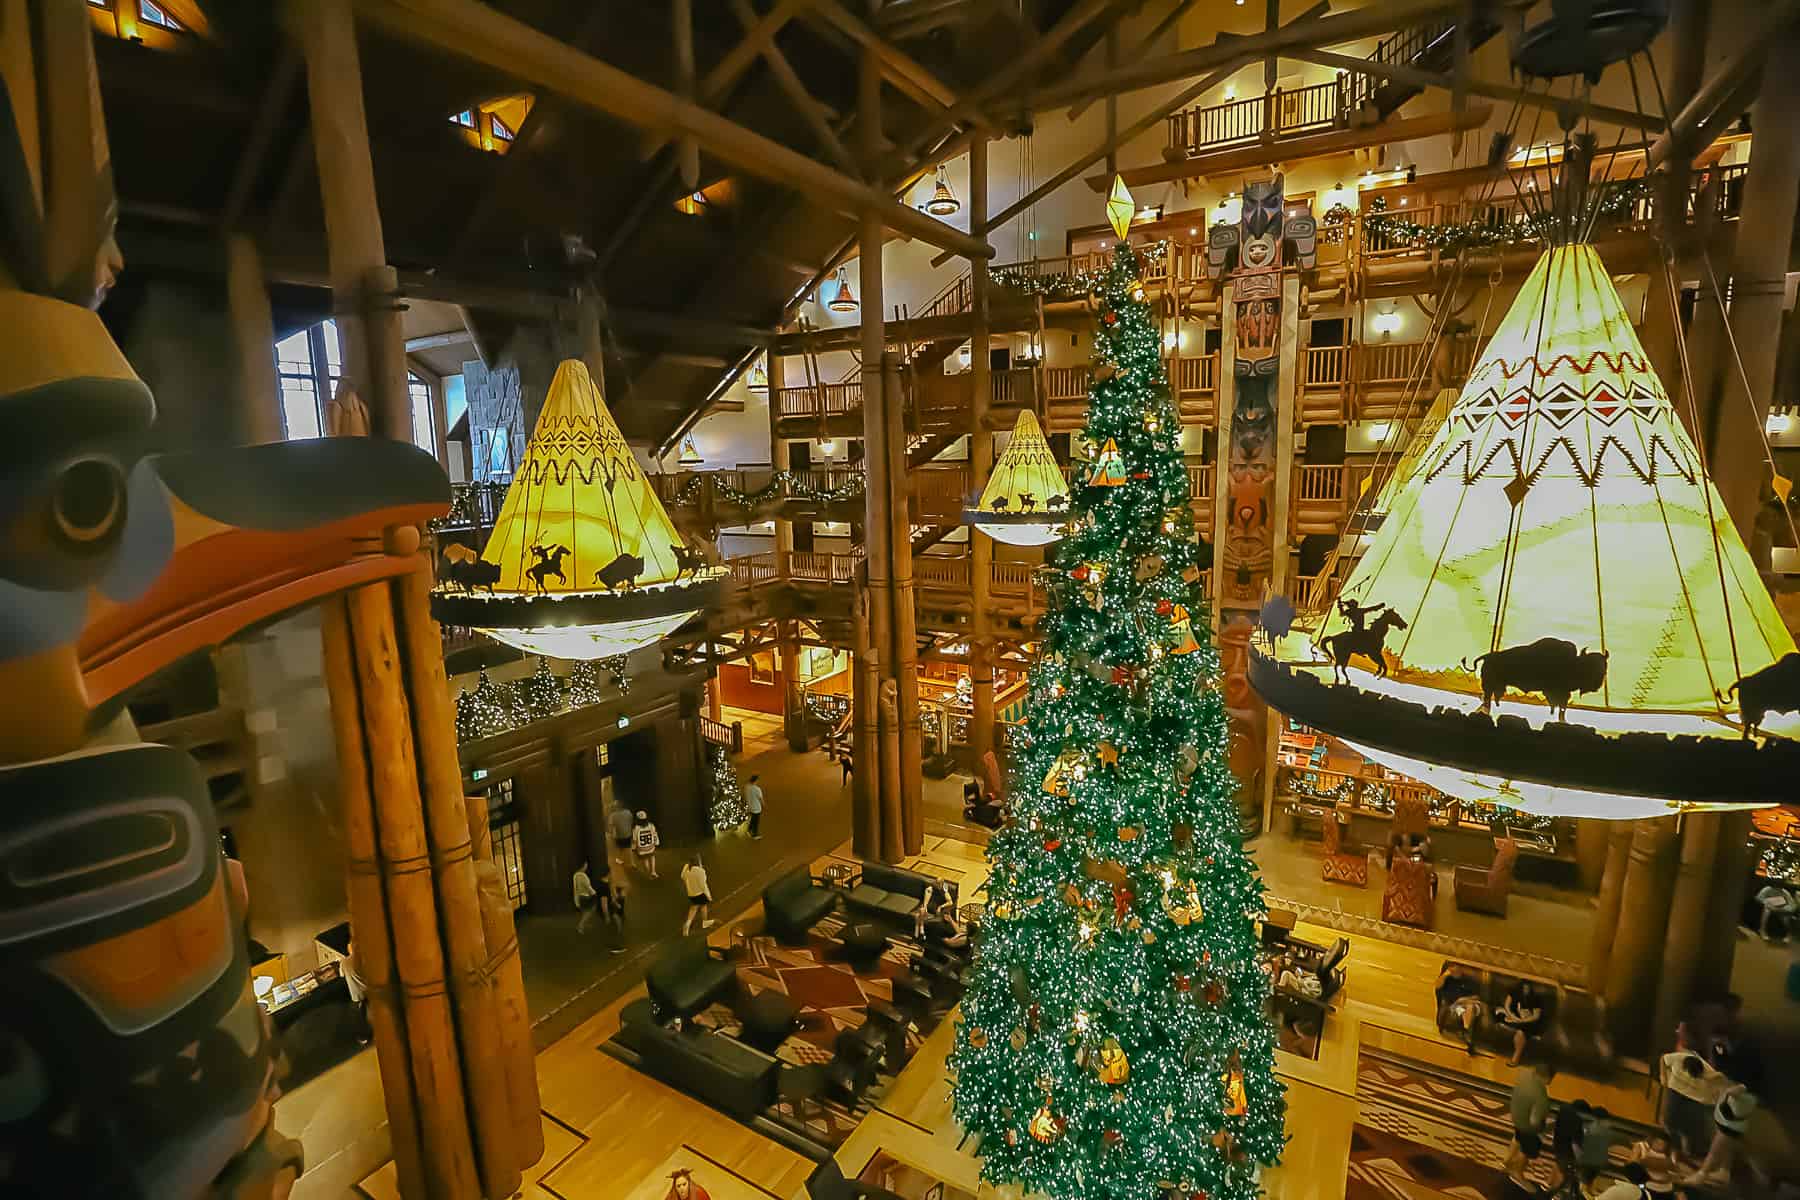 A view of the Christmas tree at Disney's Wilderness Lodge from an upper level. 